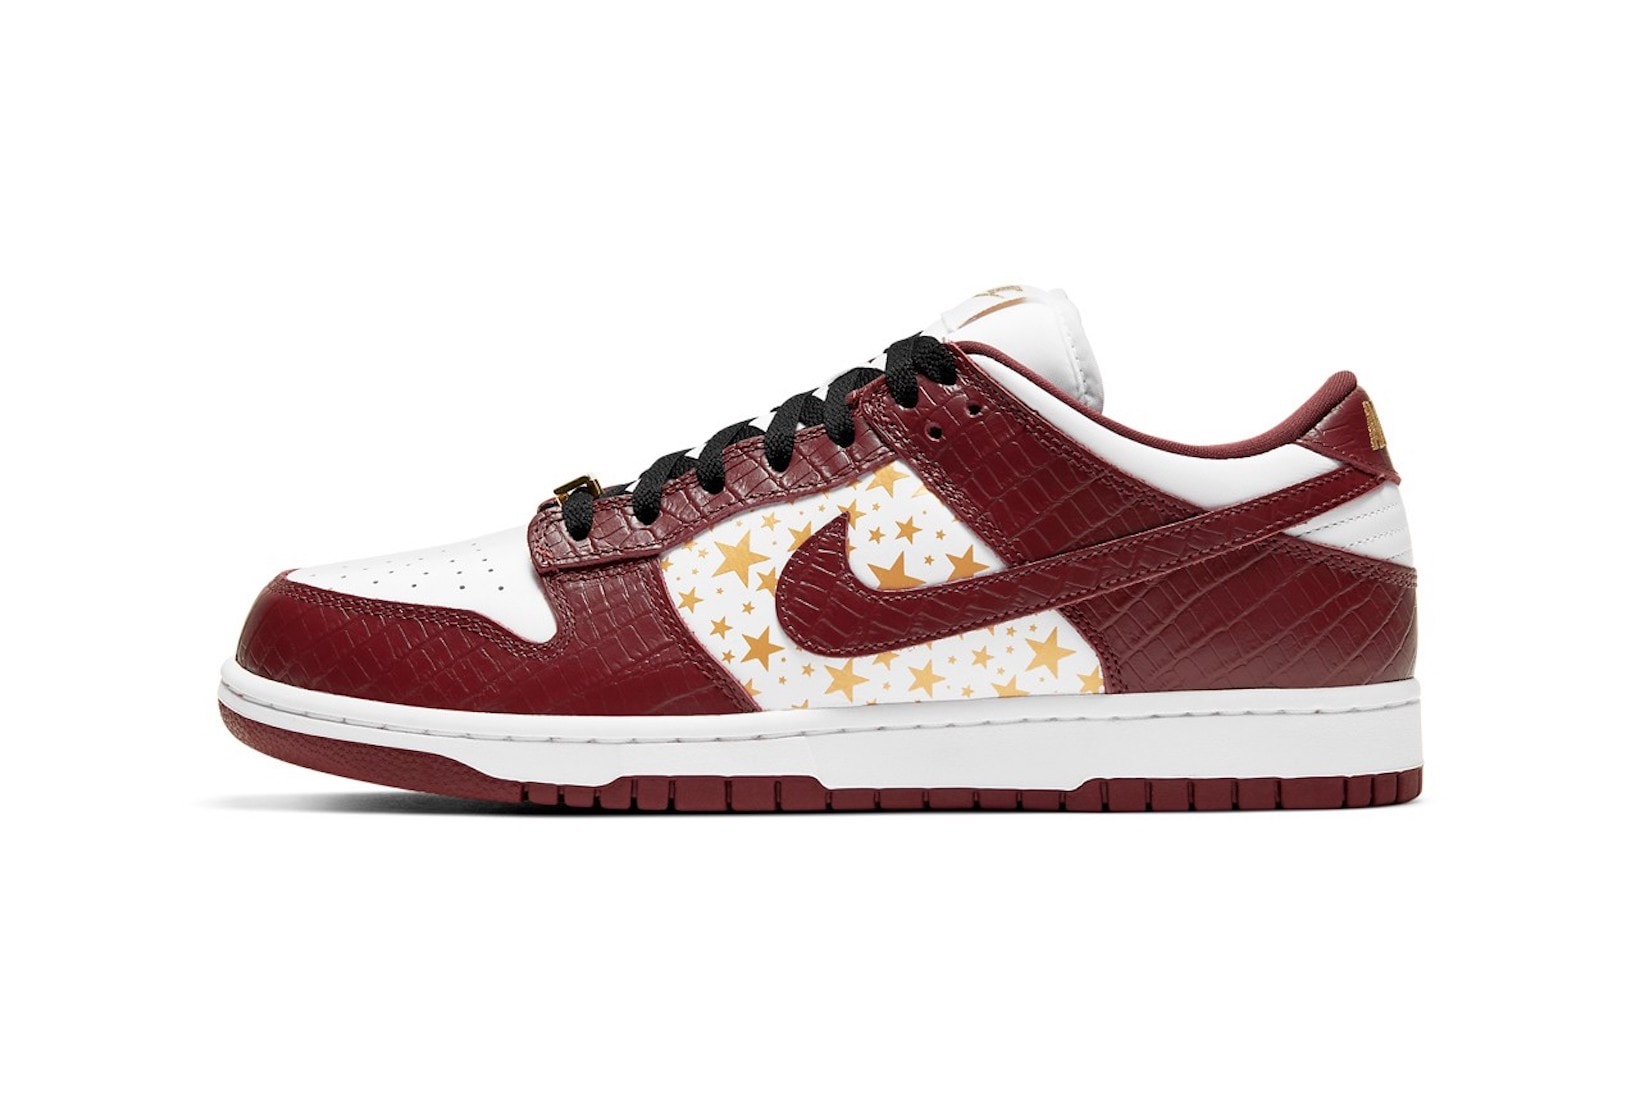 supreme nike sb dunk low collaboration sneakers barkroot brown burgundy red white gold stars lateral black laces